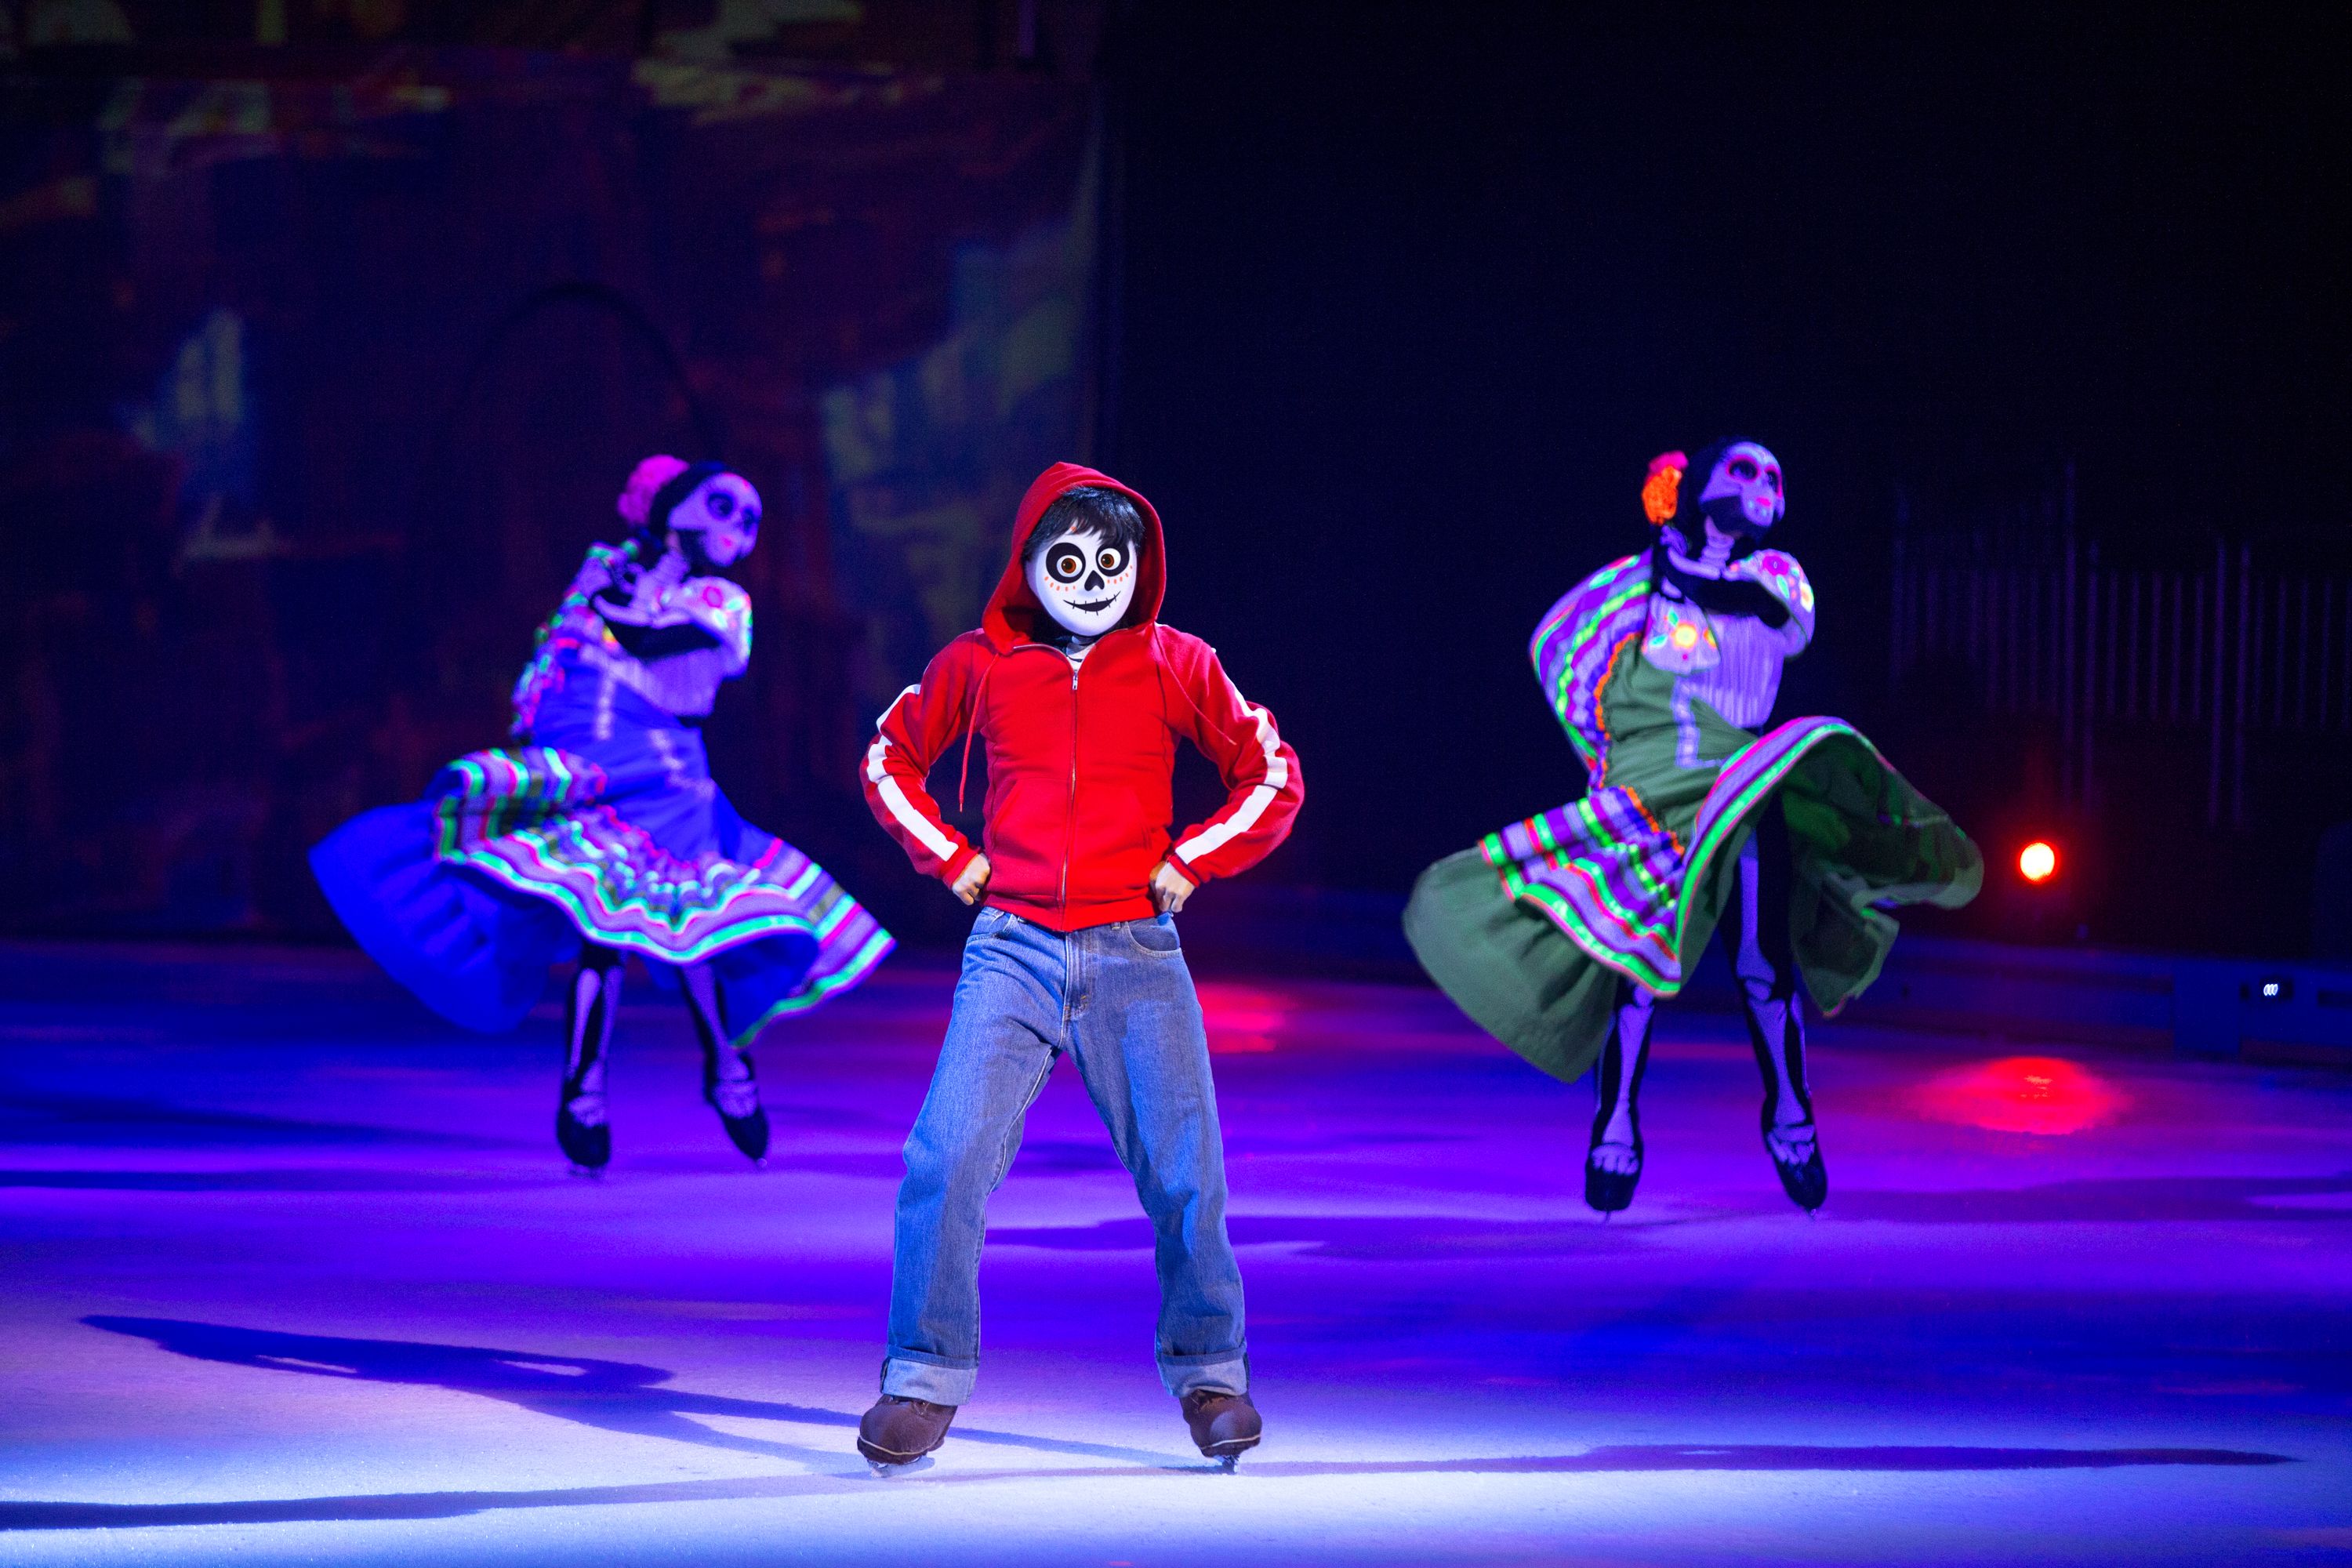 Disney on Ice Returns to Oakland Feb. 2327, 40th Anniversary of Disney on Ice at Oakland Arena